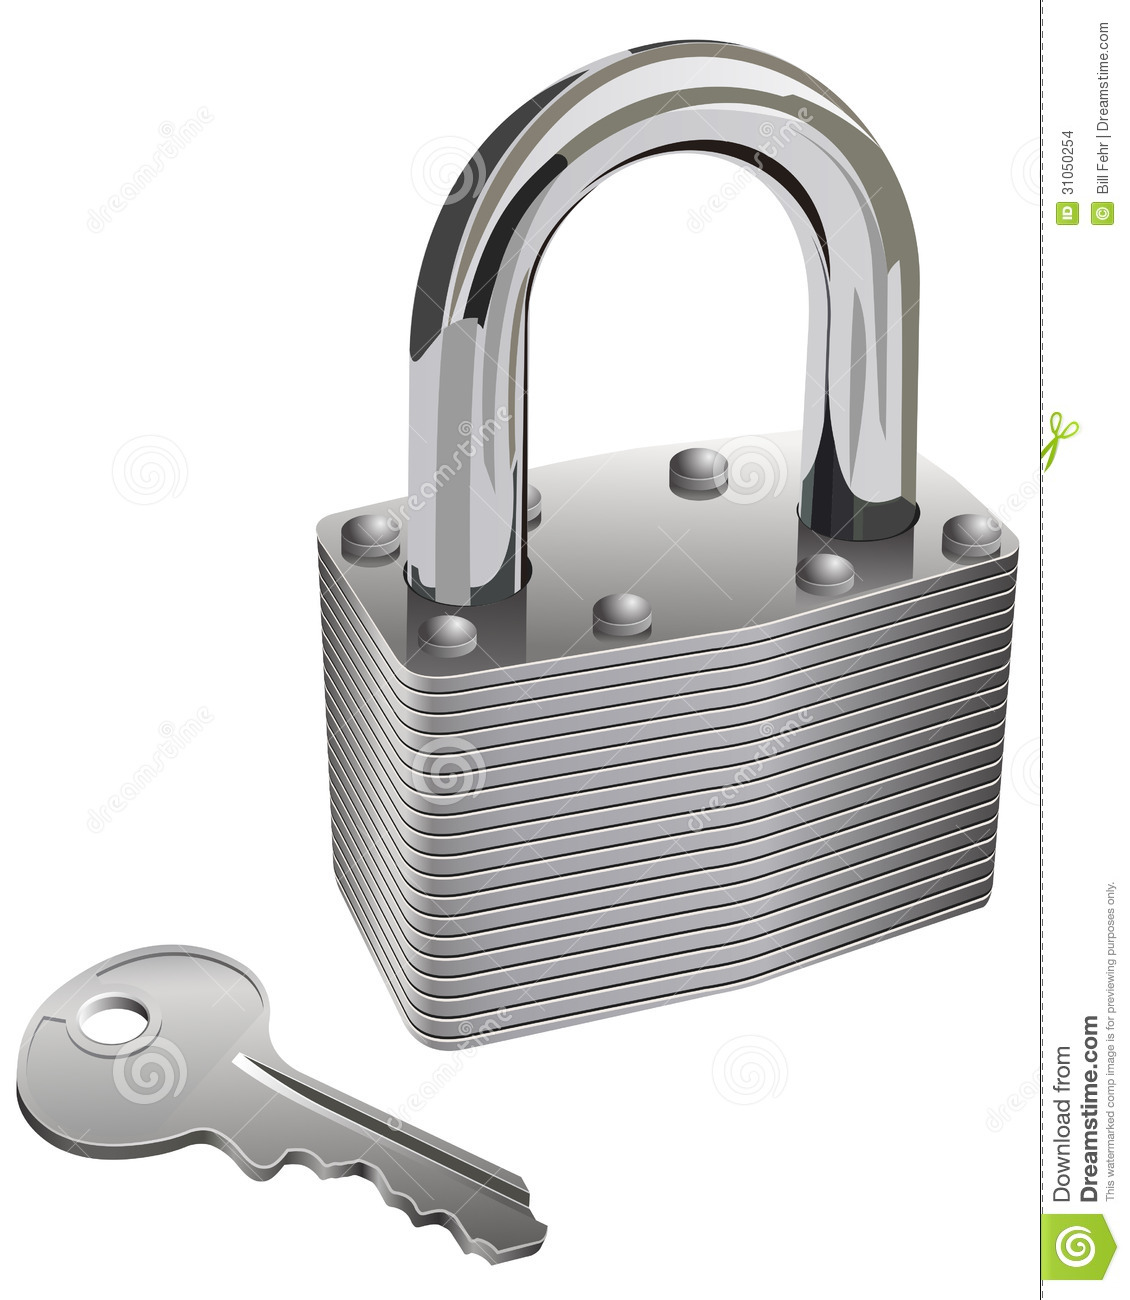 Isolated And Realistic Chrome Pad Lock And Key